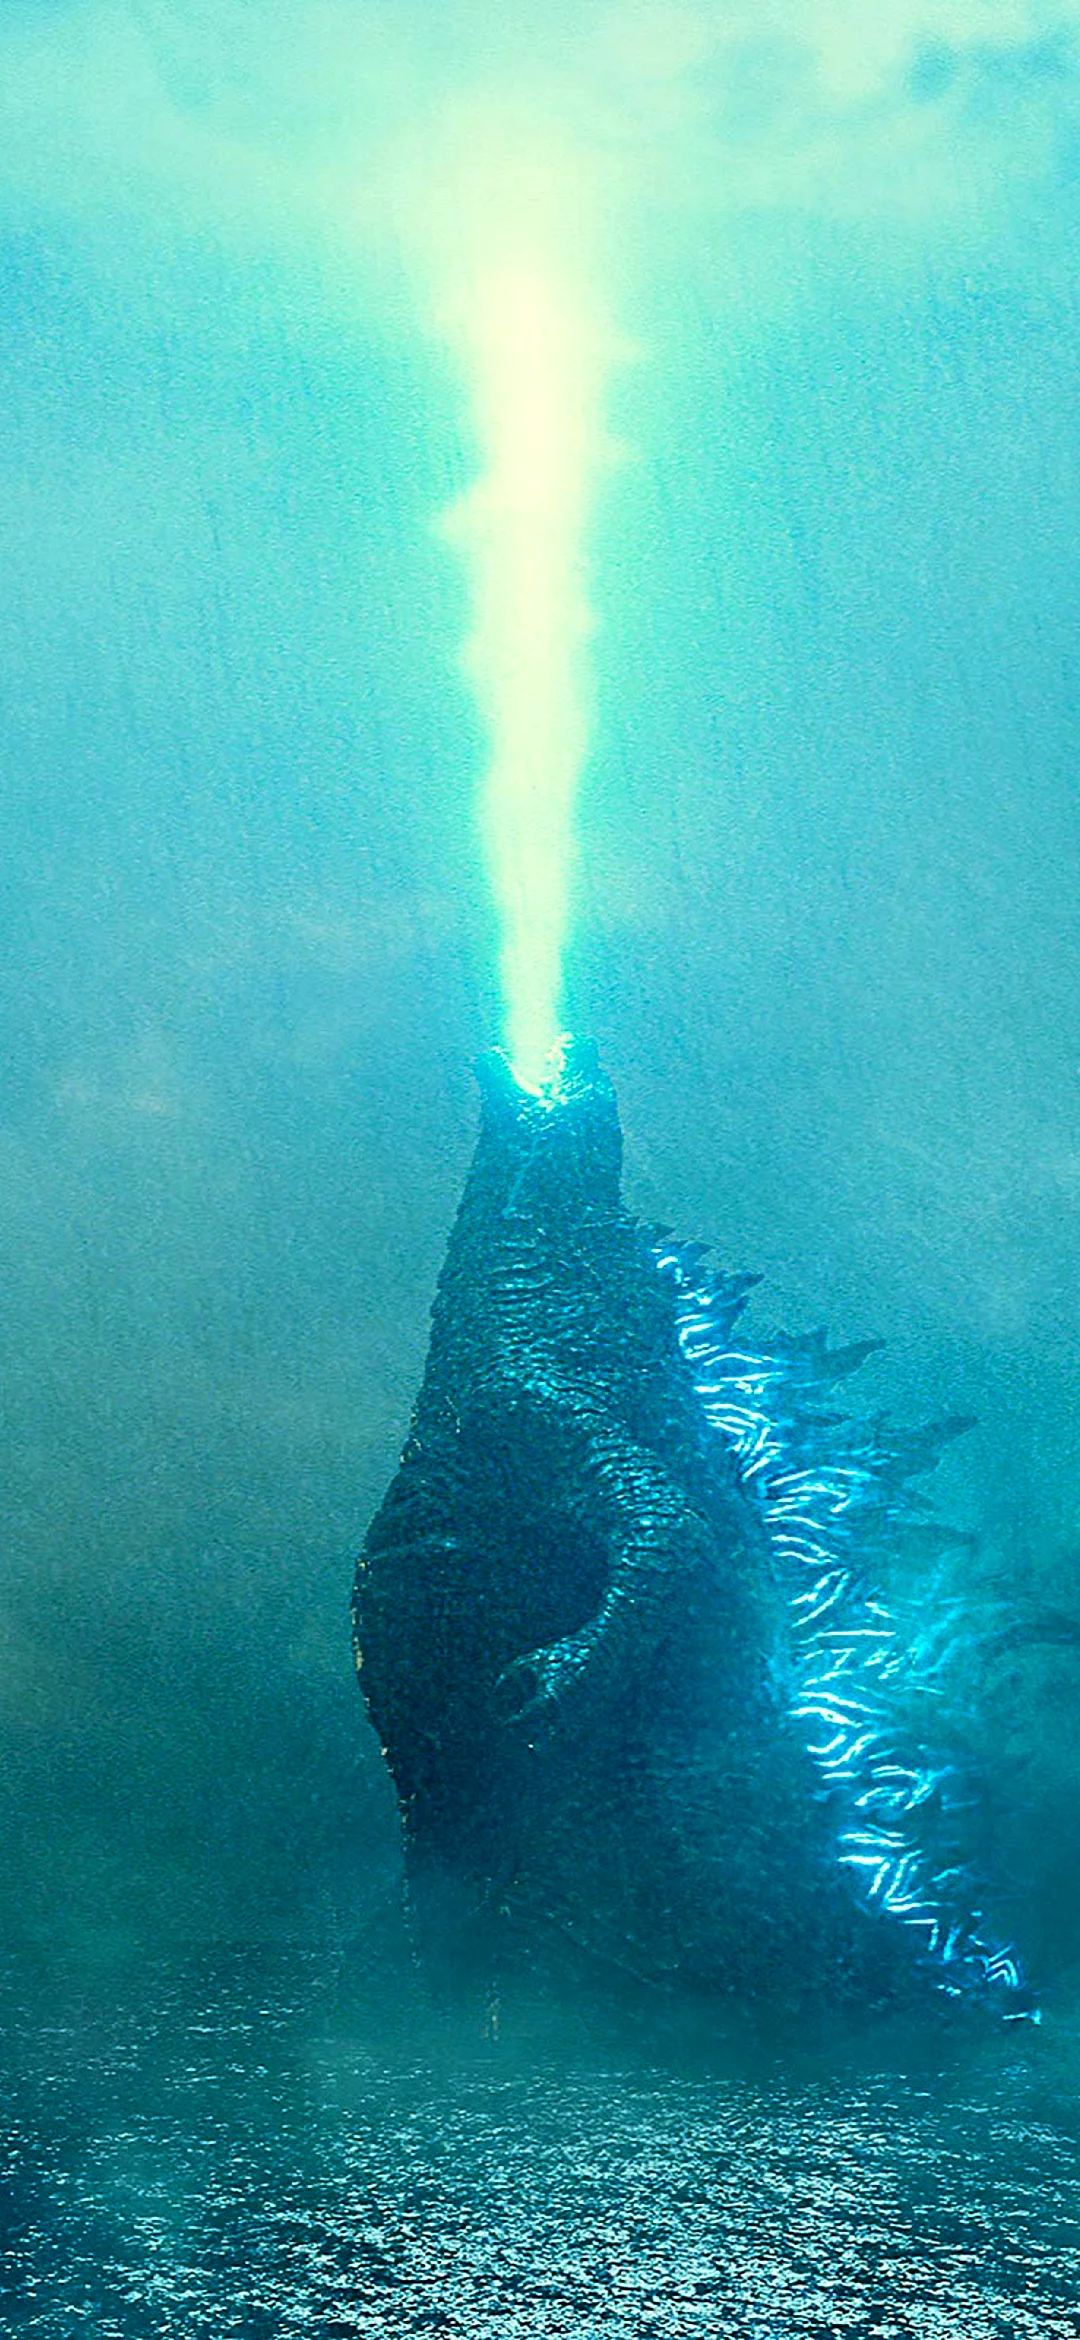 Godzilla King Of The Monsters 2019 Wallpaper for iPhone 13 mini